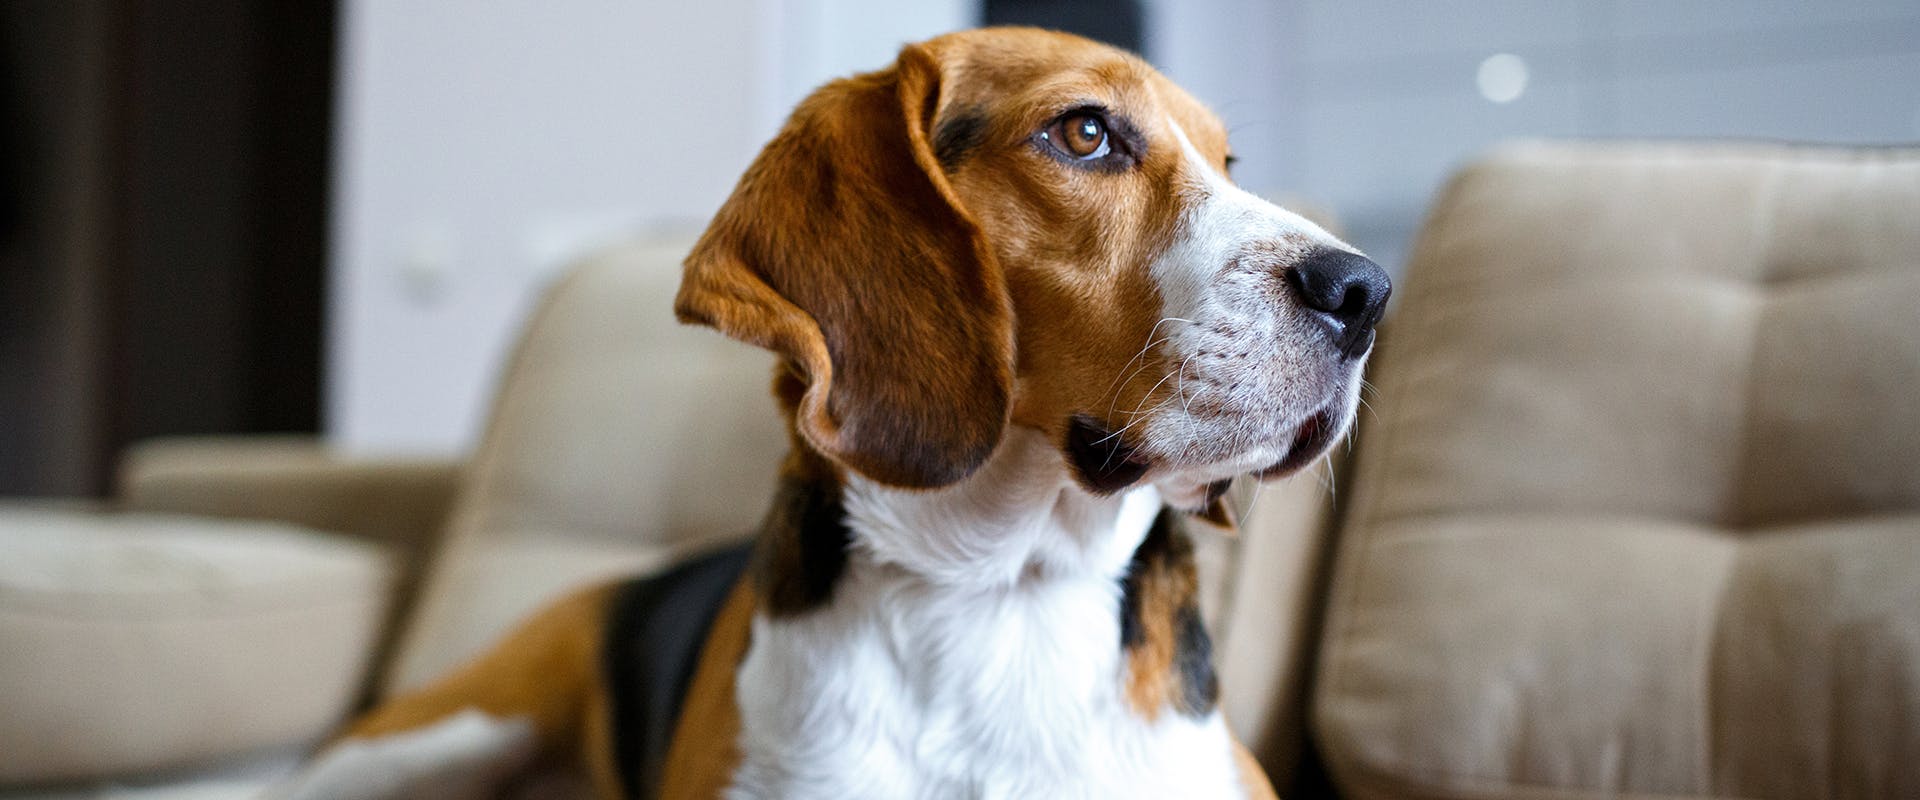 A Beagle dog with floppy ears looking off to the side